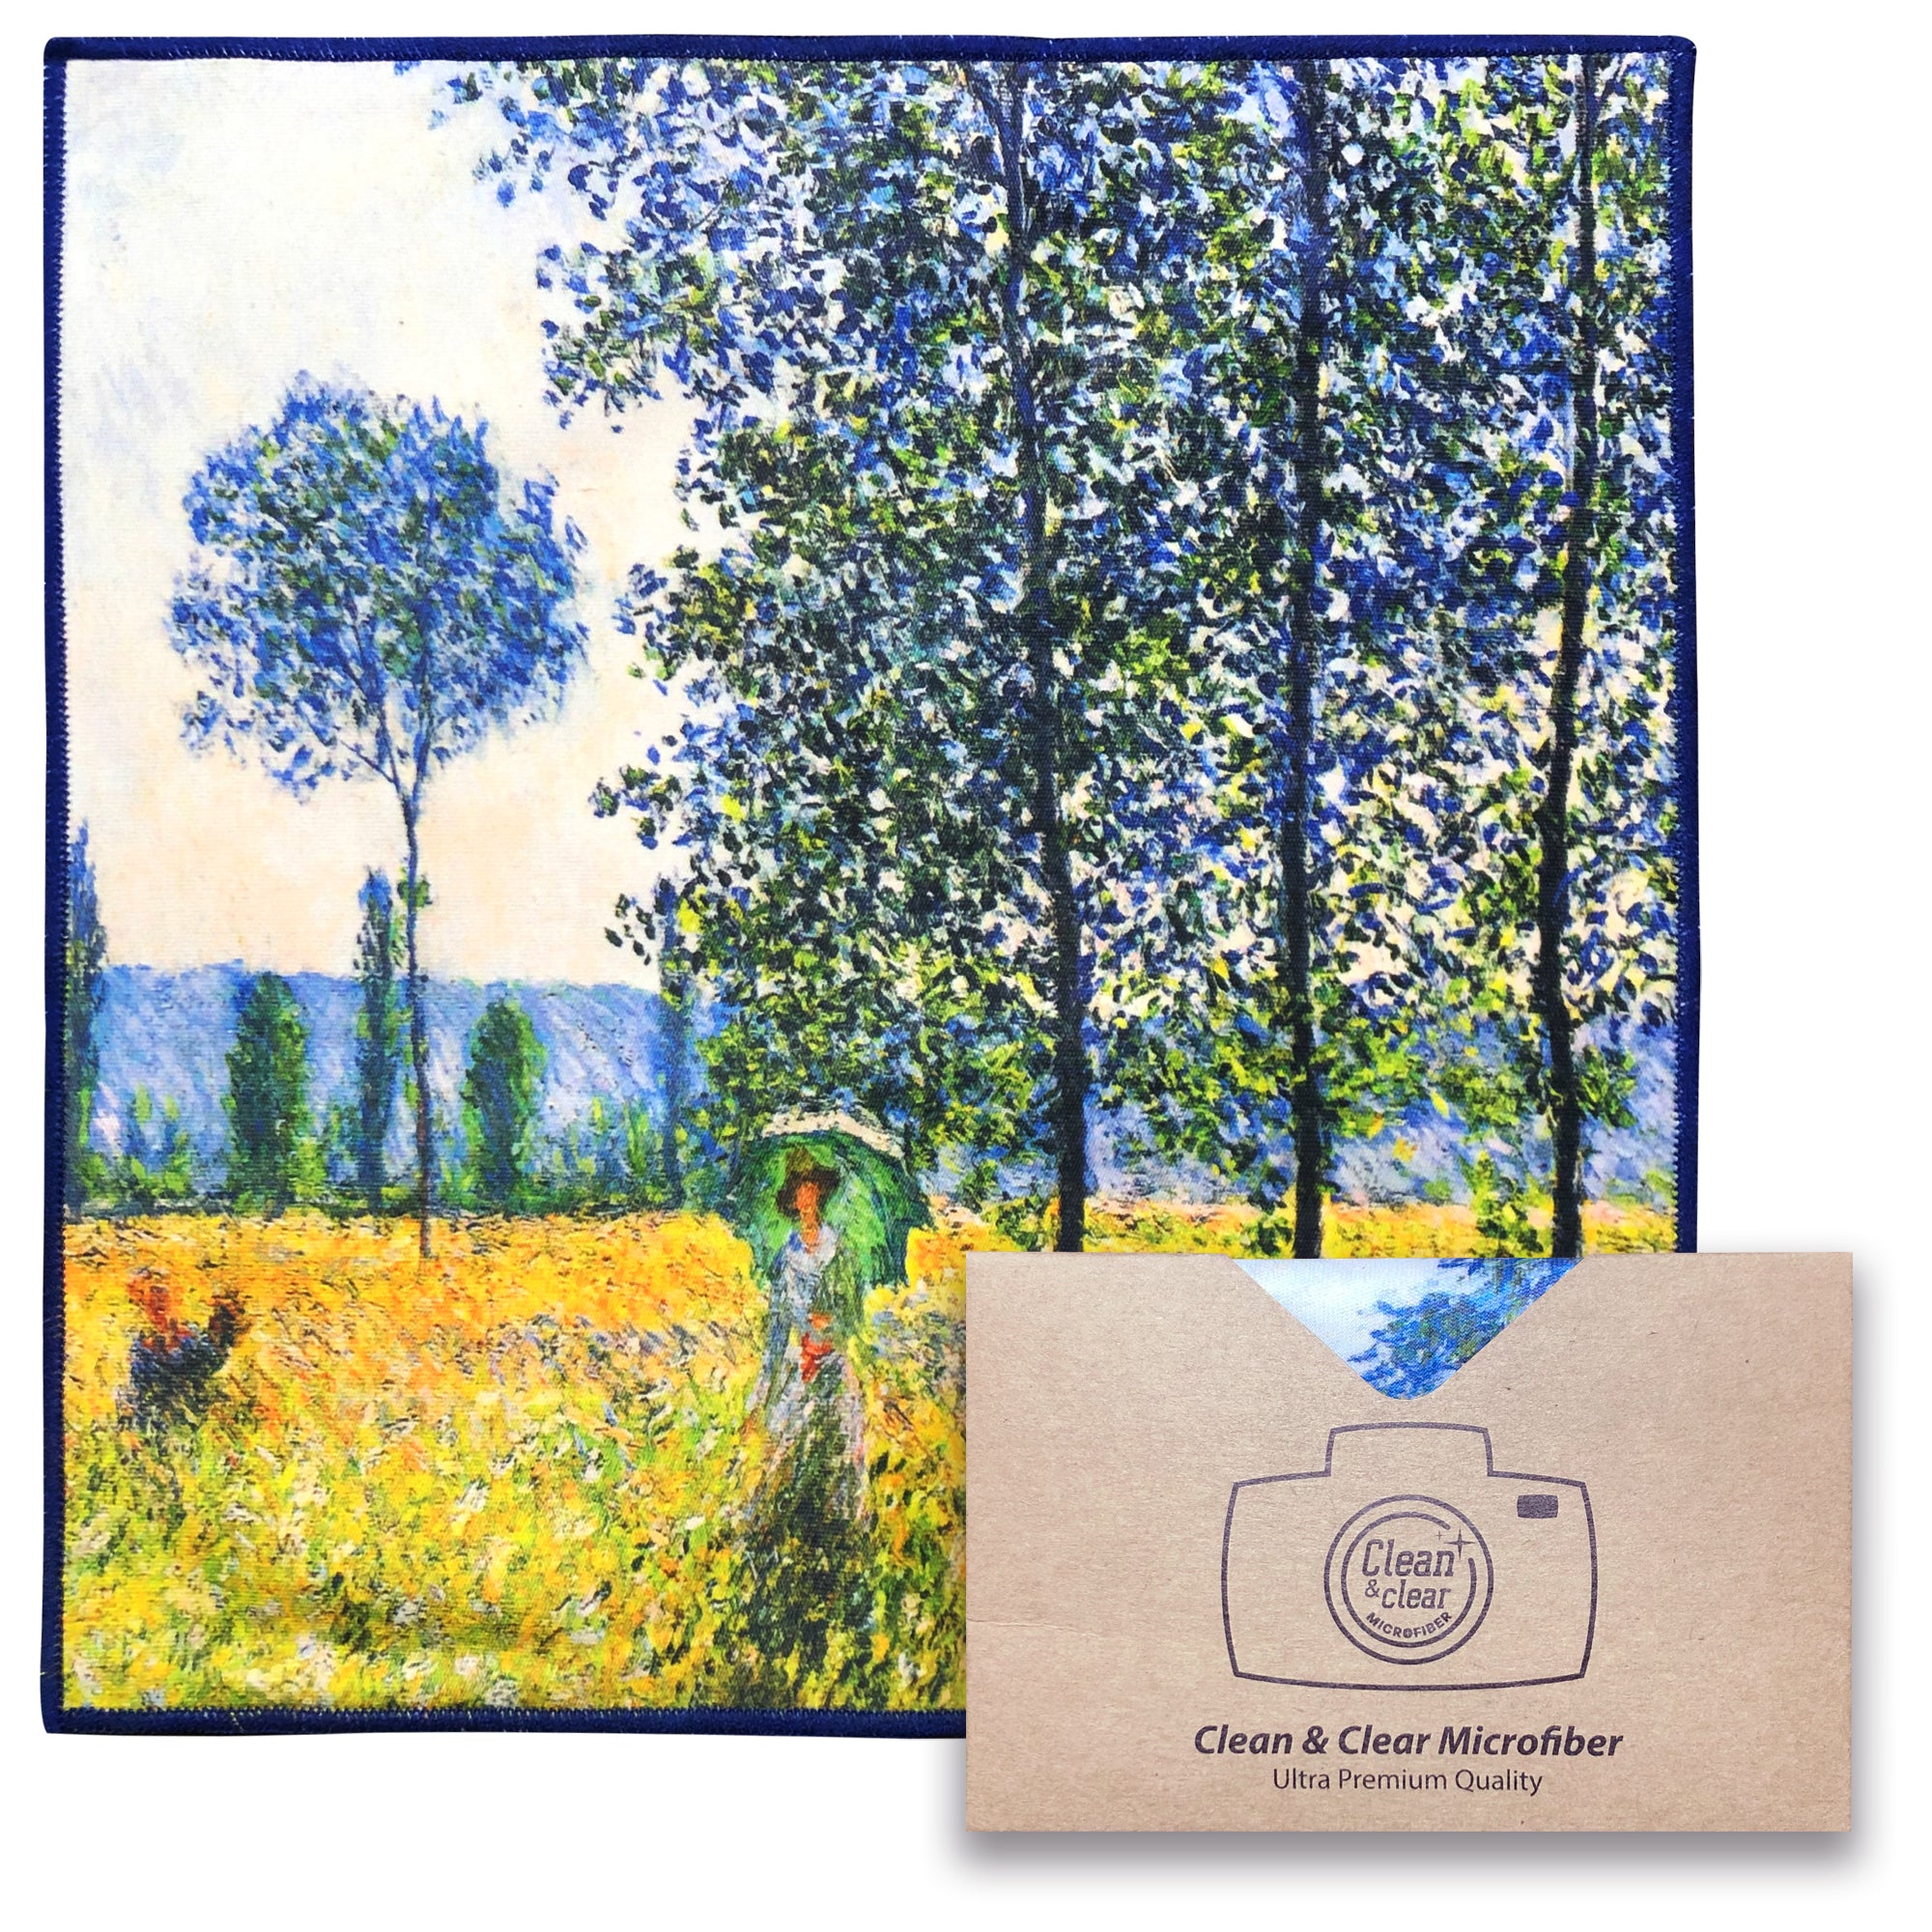 [10pack set] World Best Classic Art Collection - Ultra Premium Quality Microfiber Cleaning Cloths (Best for Camera Lens, Glasses, Screens, and All Lens)